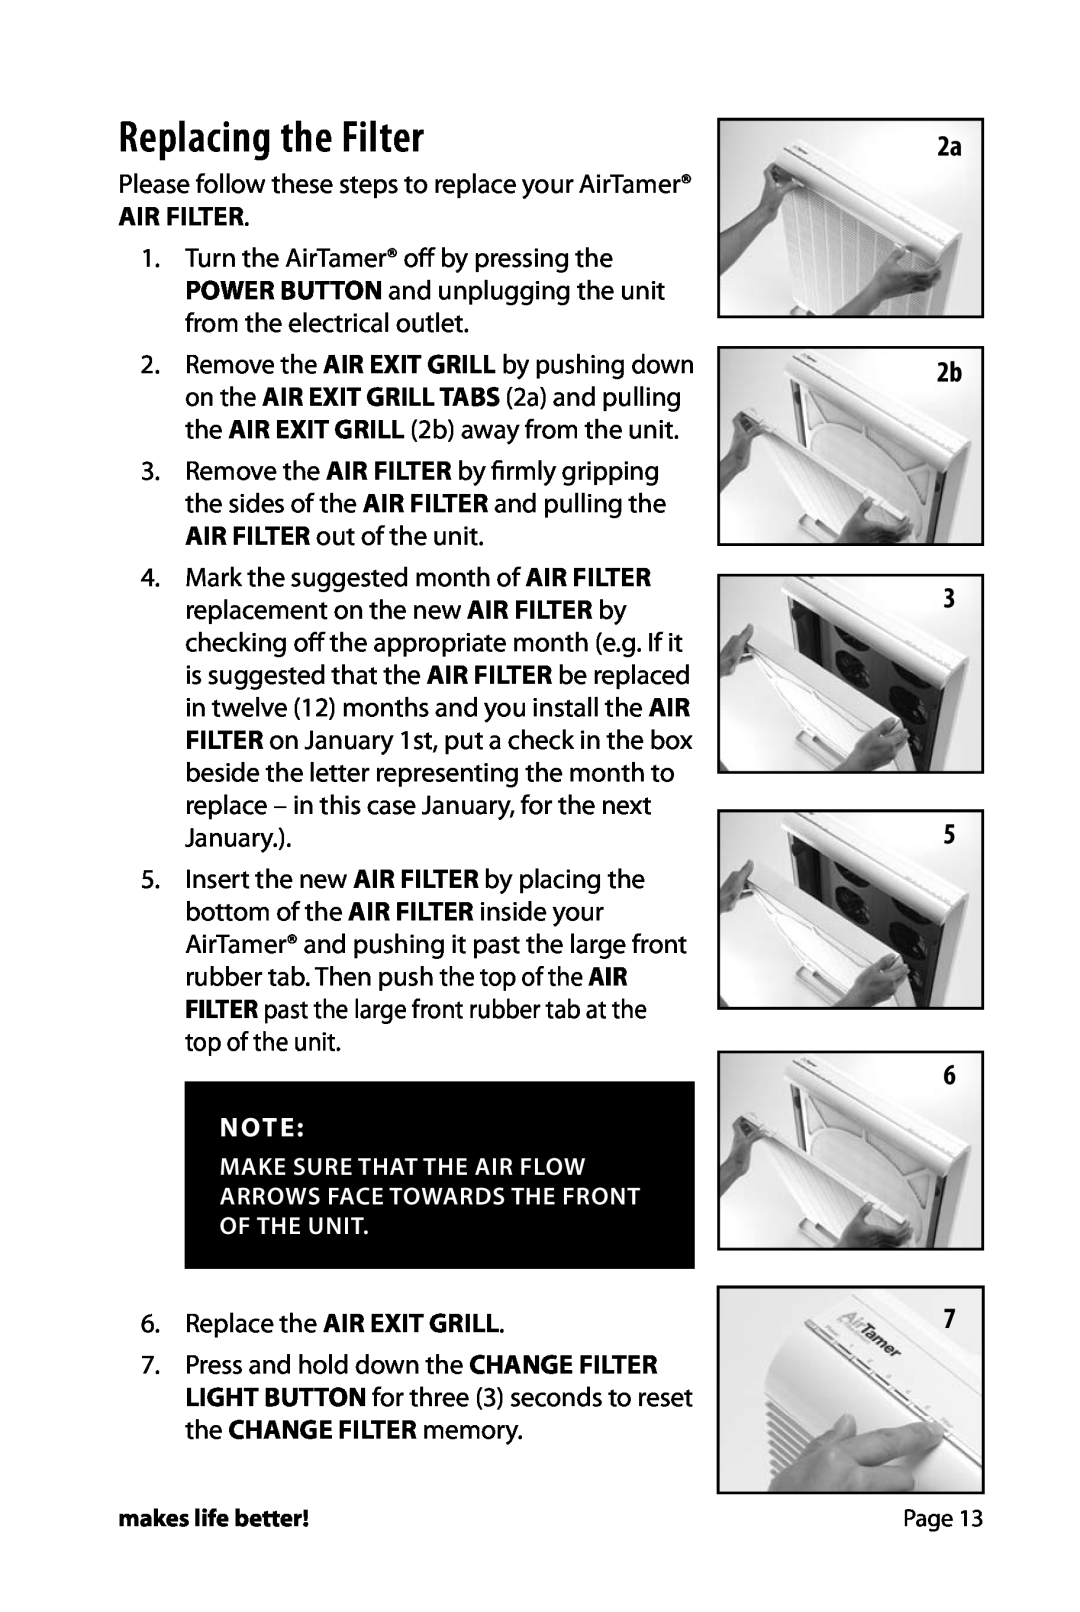 FilterStream HW_A710 instruction manual Replacing the Filter, 2a 2b 